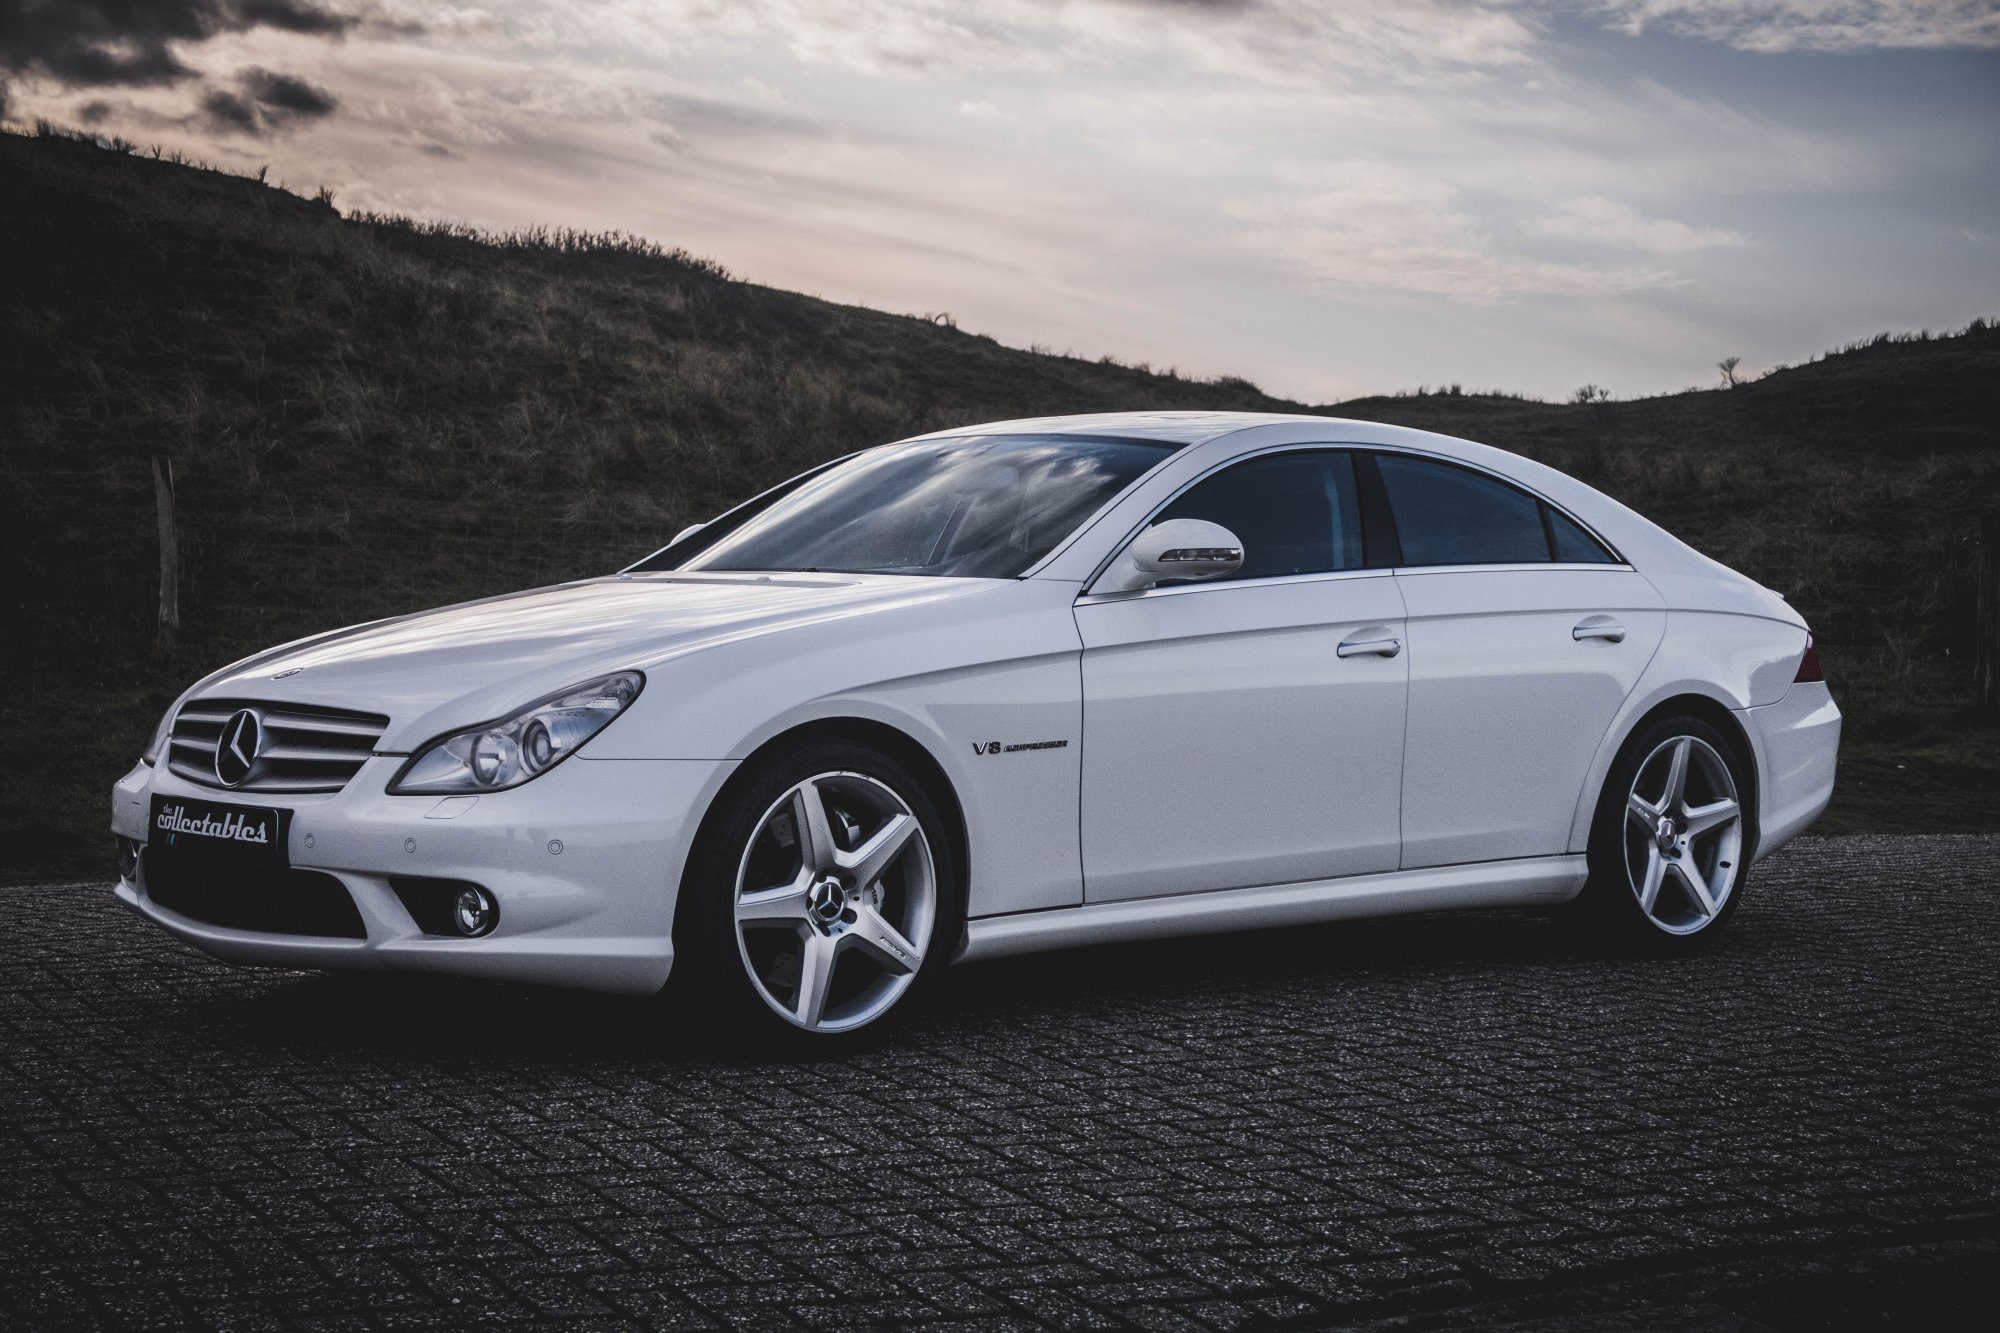 The Collectables Mercedes CLS55 AMG als youngtimer Autoblog.nl